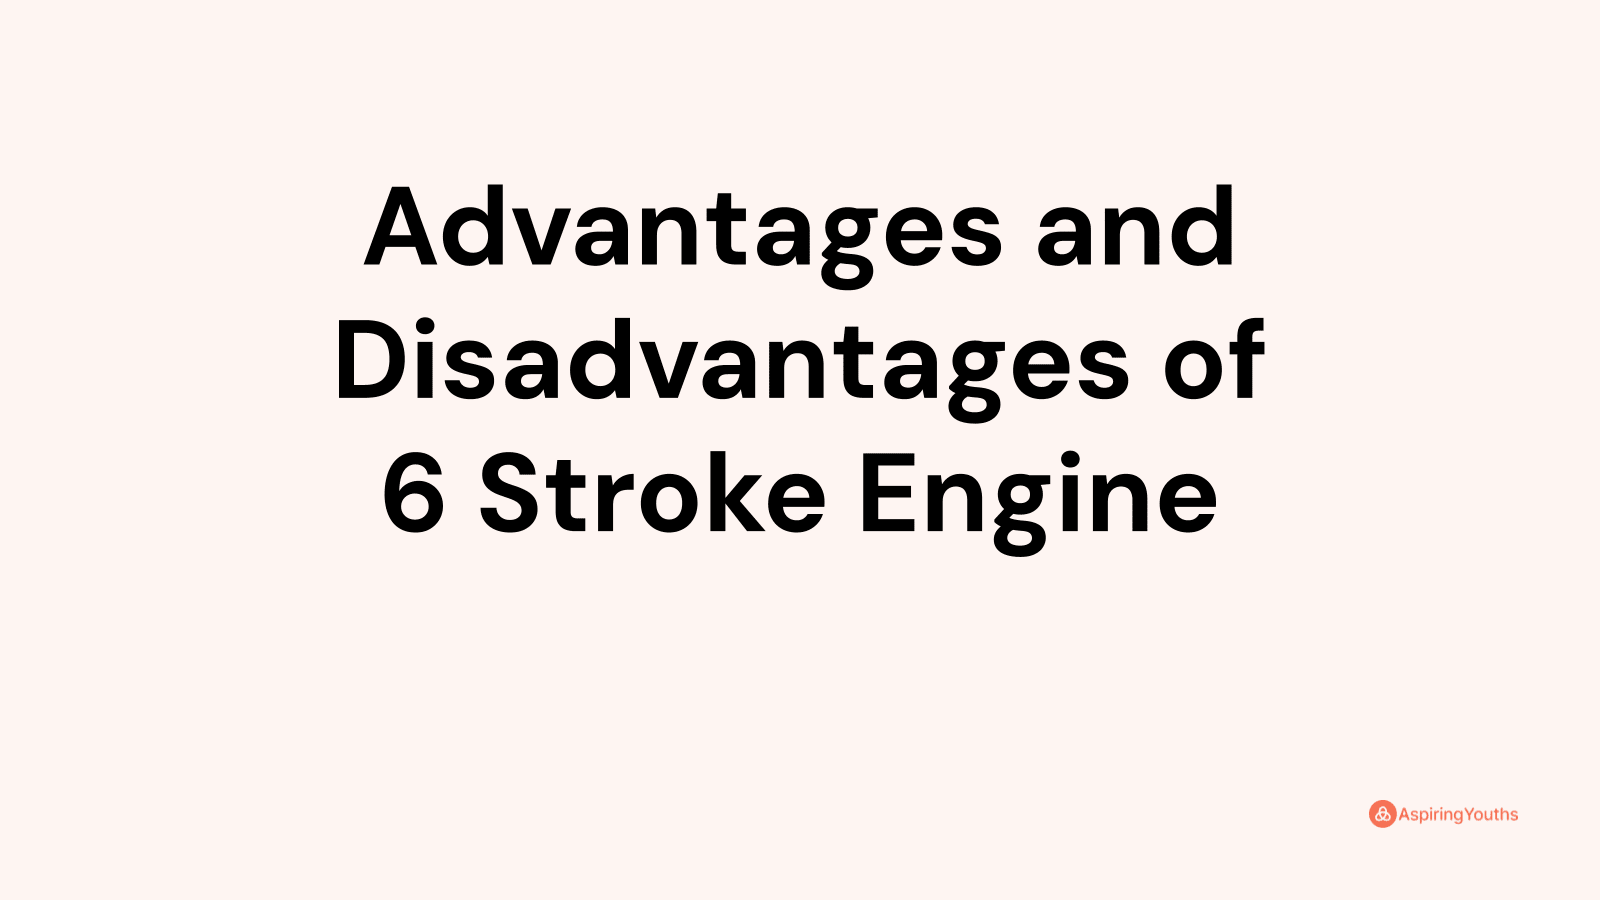 Advantages and disadvantages of 6 Stroke Engine